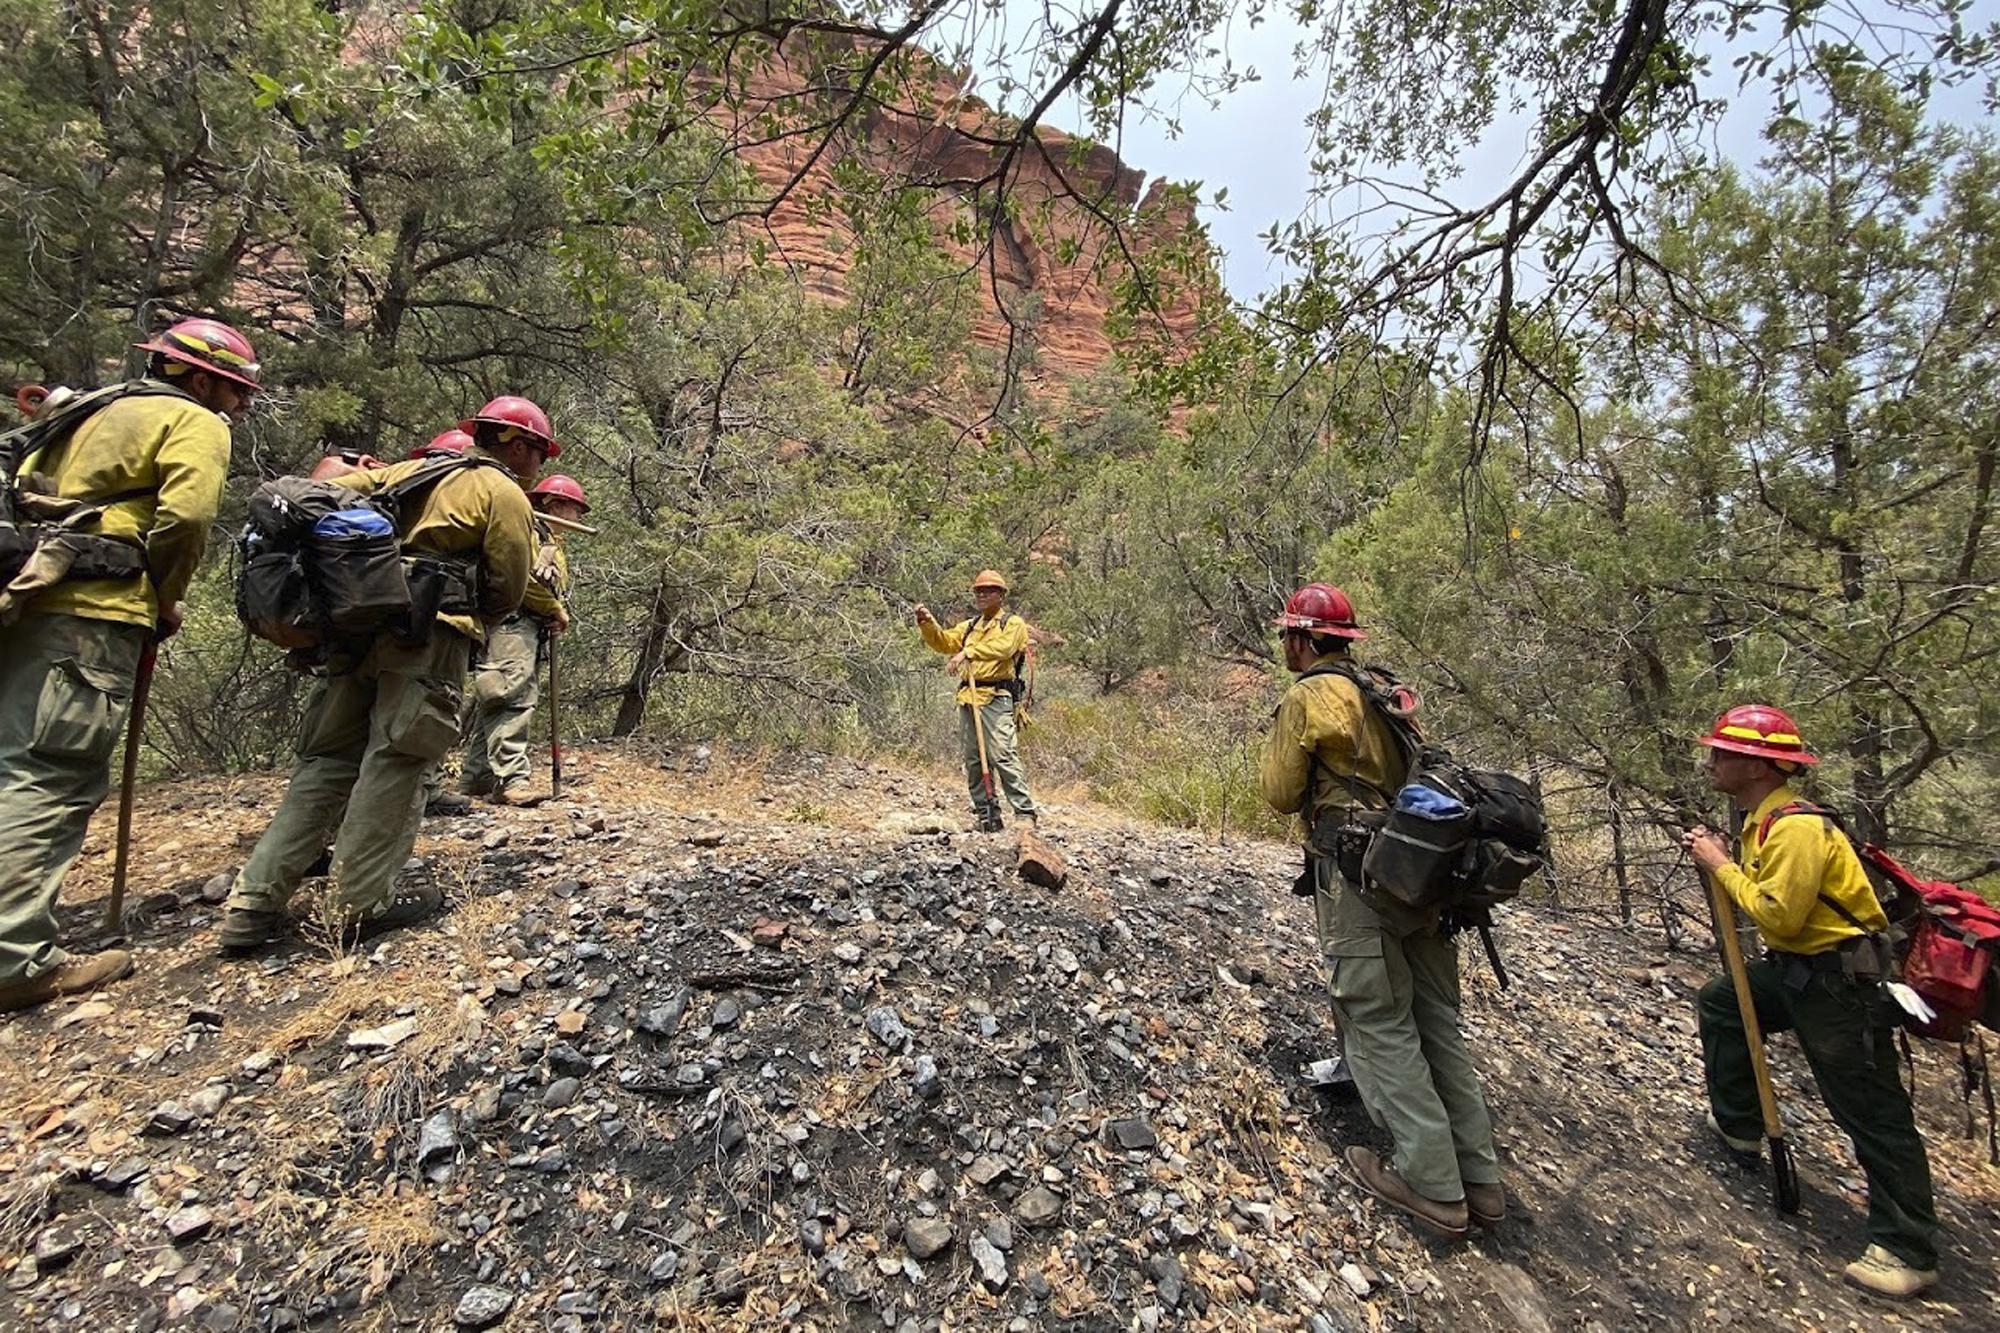 arizona fire crew prepping forest for potential wildfire